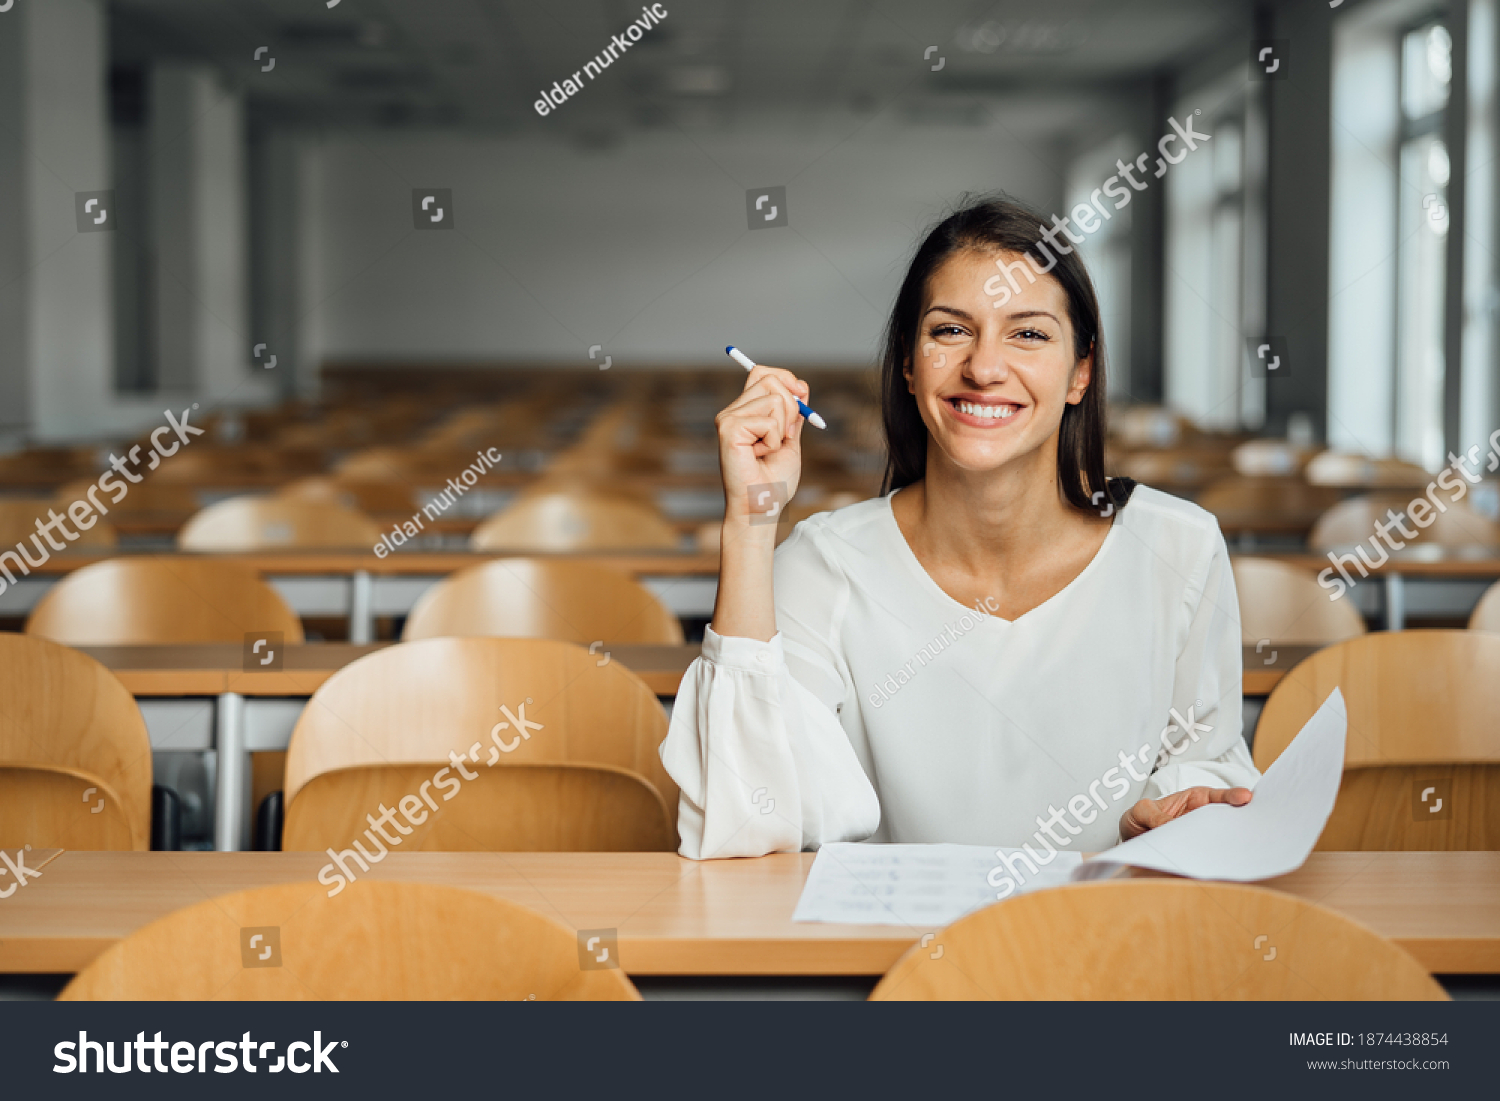 Knowledgable smiling student taking an easy exam in an empty amphitheater. An optimistic student taking an in-class test. Happy woman having stress free education evaluation.Essay exam inspiration. #1874438854